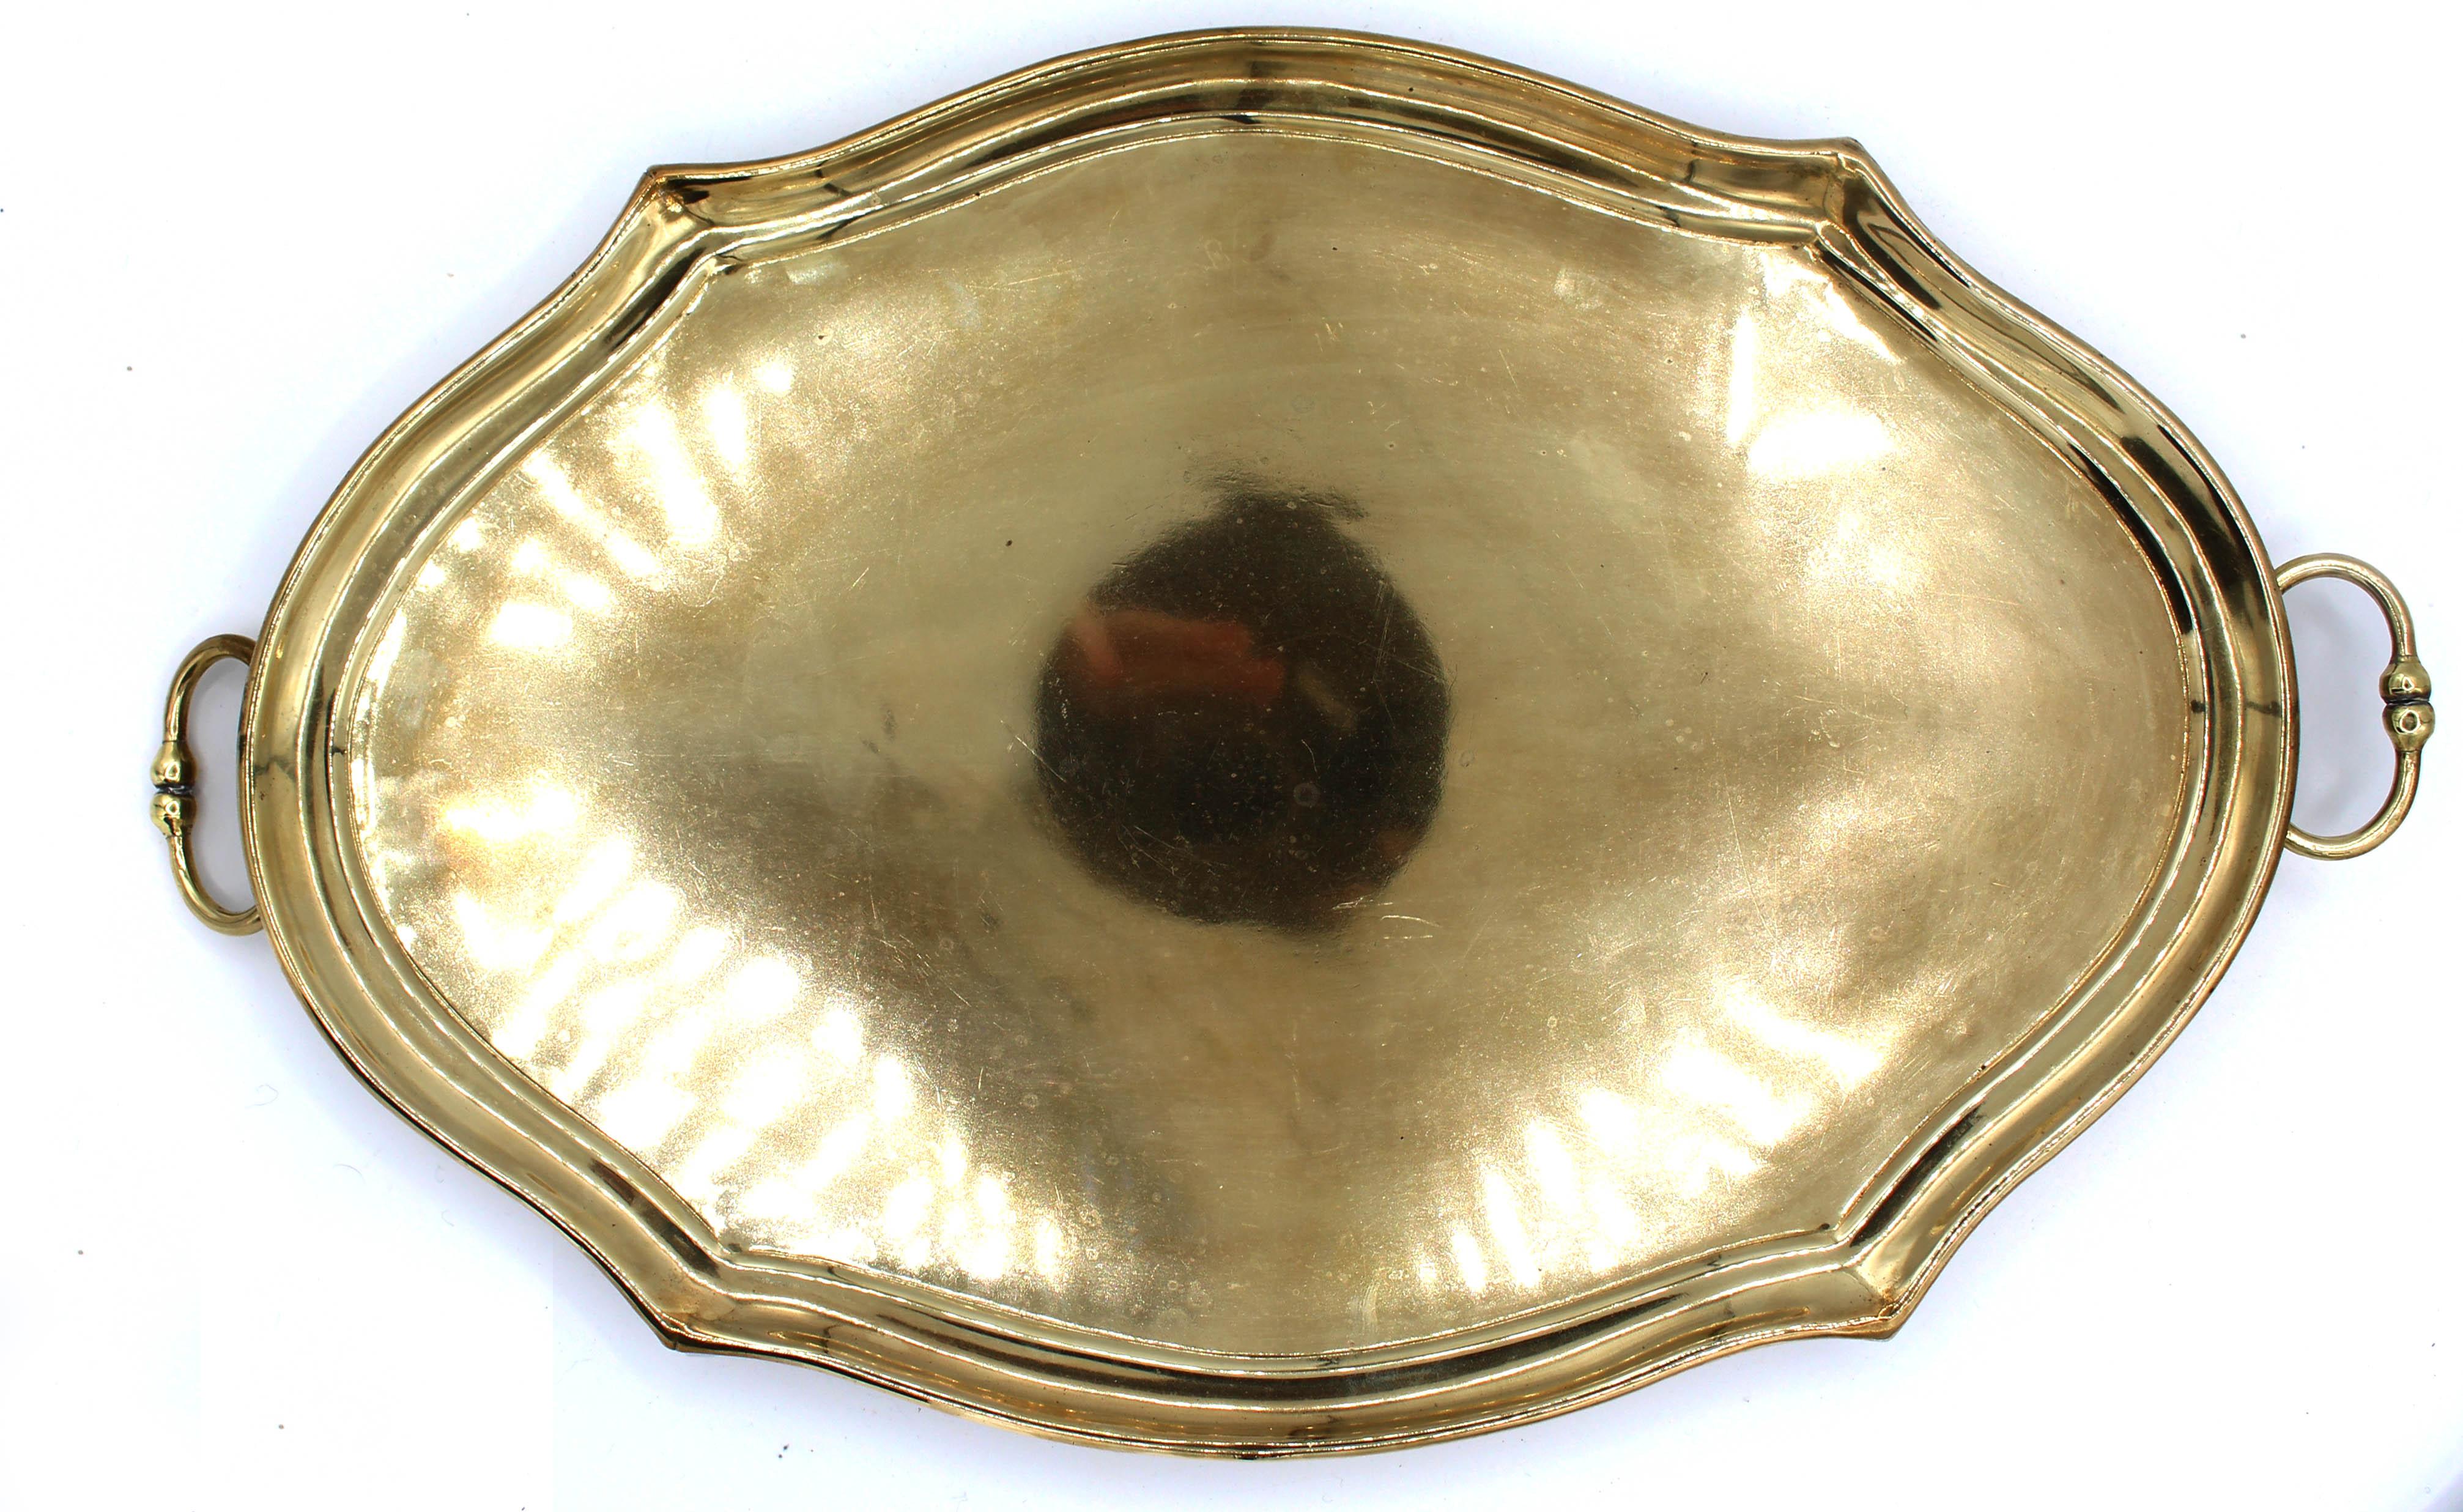 Mid-20th century cartouche form brass cocktail tray, English. Handsome, in traditional Chippendale style. Scrolled tip feet. Swing handles.
16